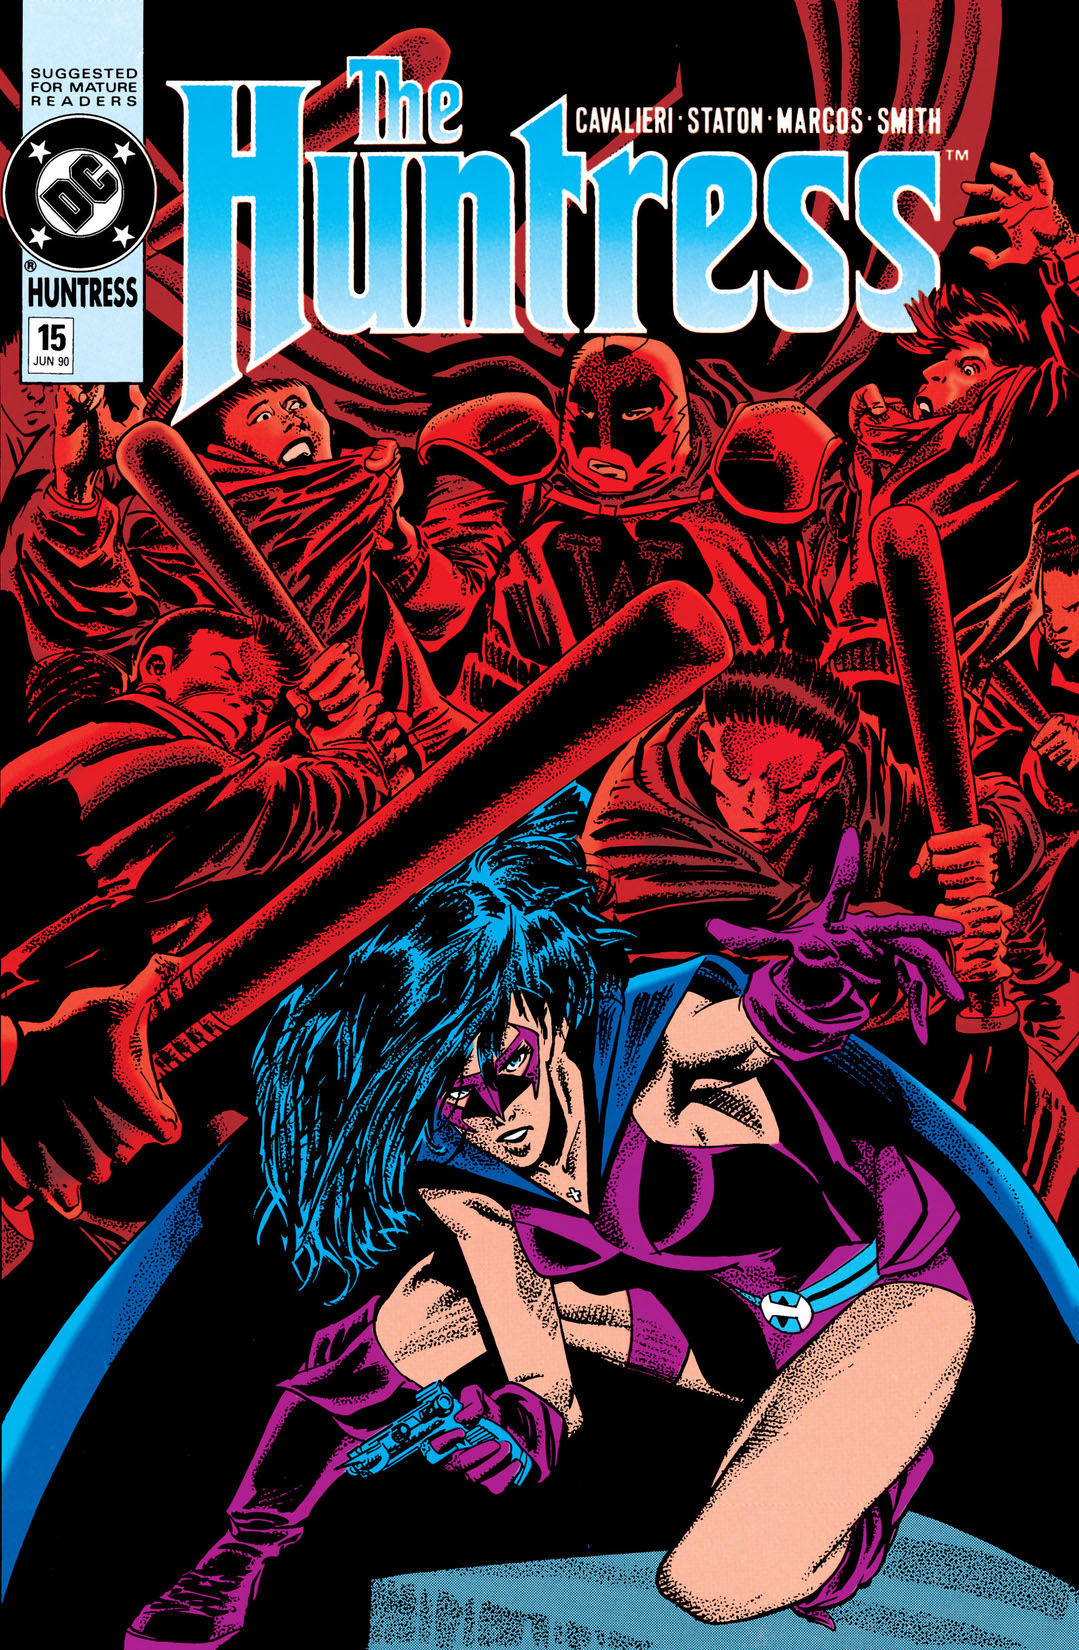 The Huntress (1989-1990) #15 preview images